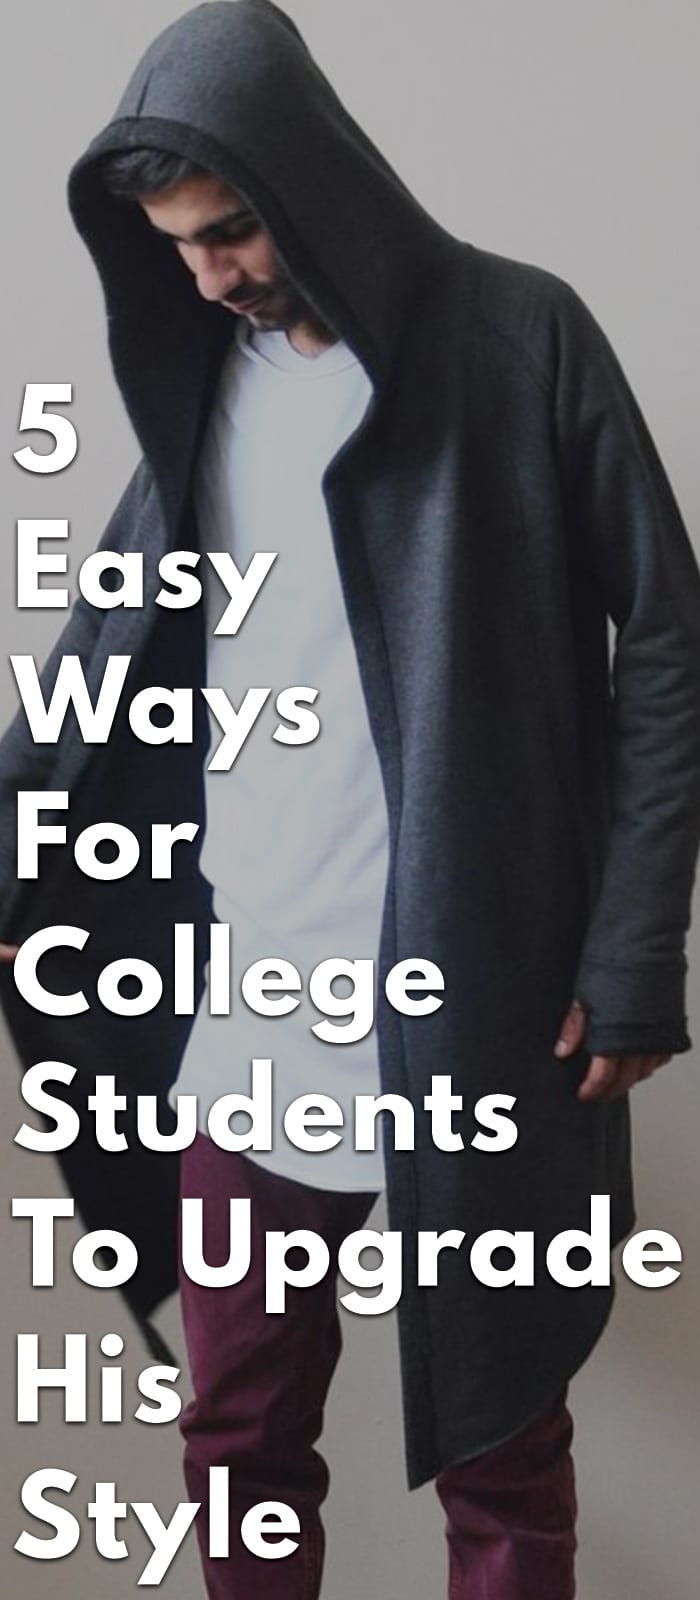 5-Easy-Ways-For-College-Students-To-Upgrade-His-Style